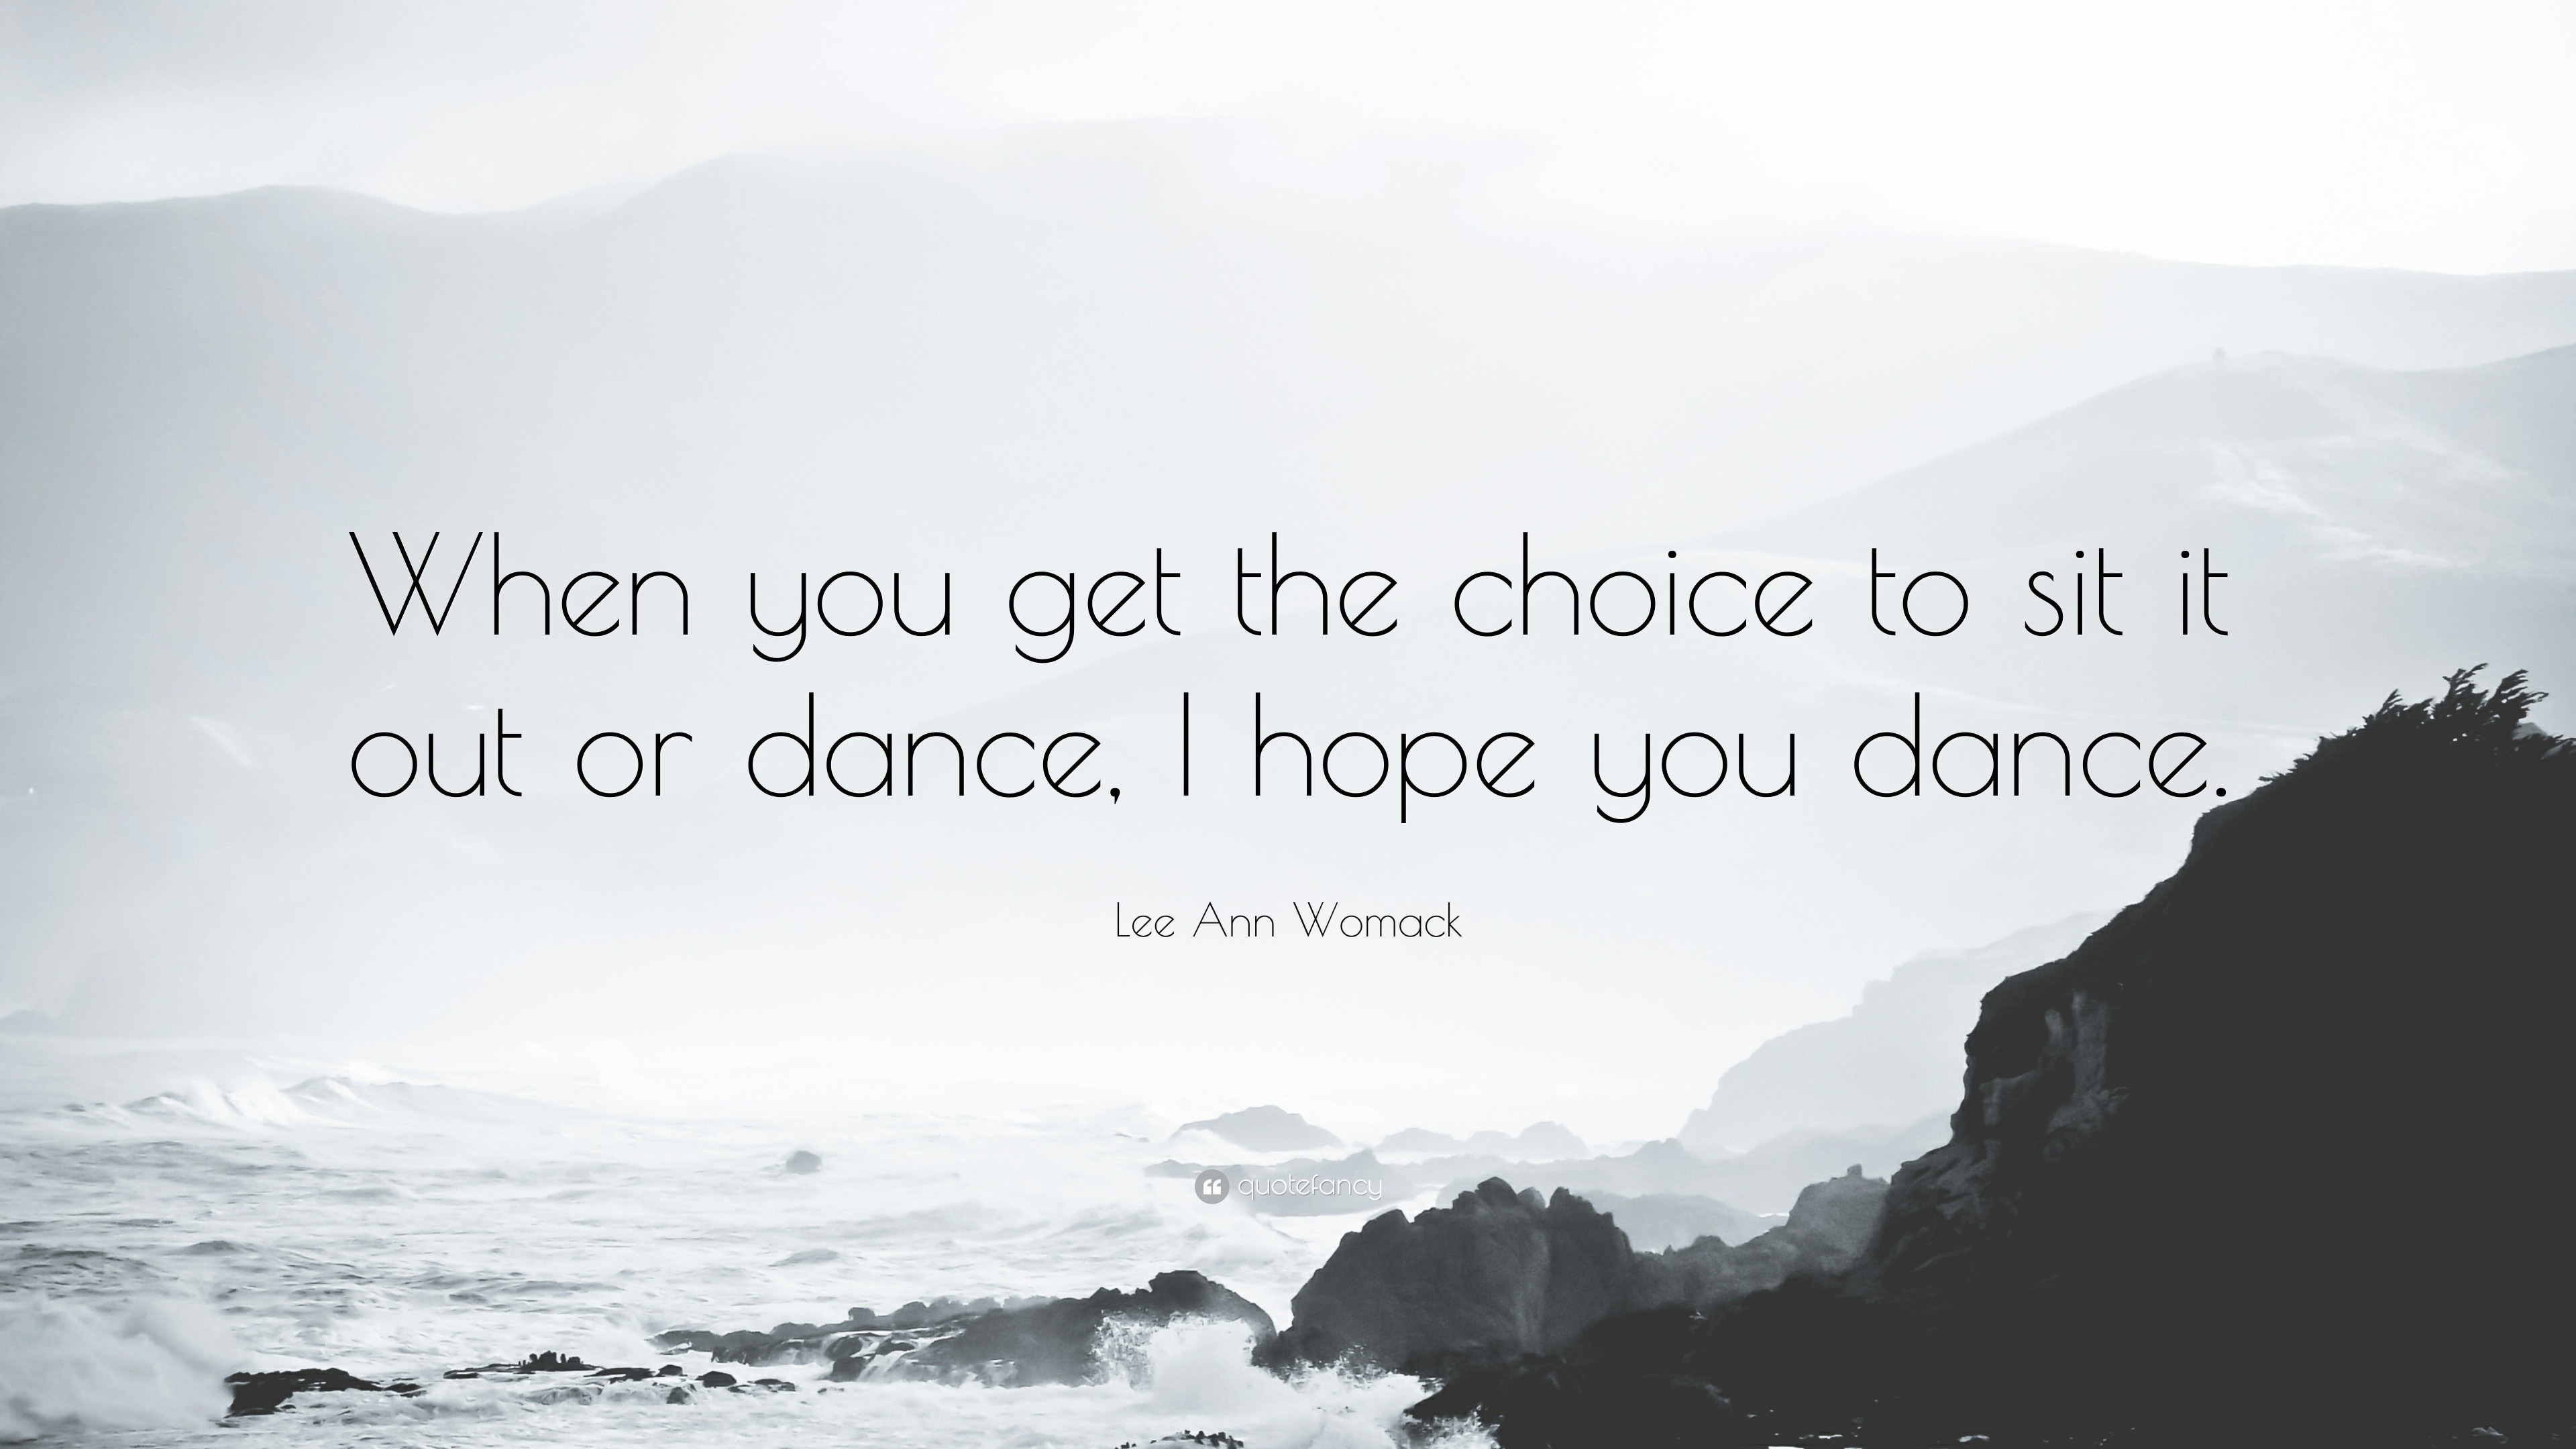 Lee Ann Womack Quote: “When you get the choice to sit it out or dance, I